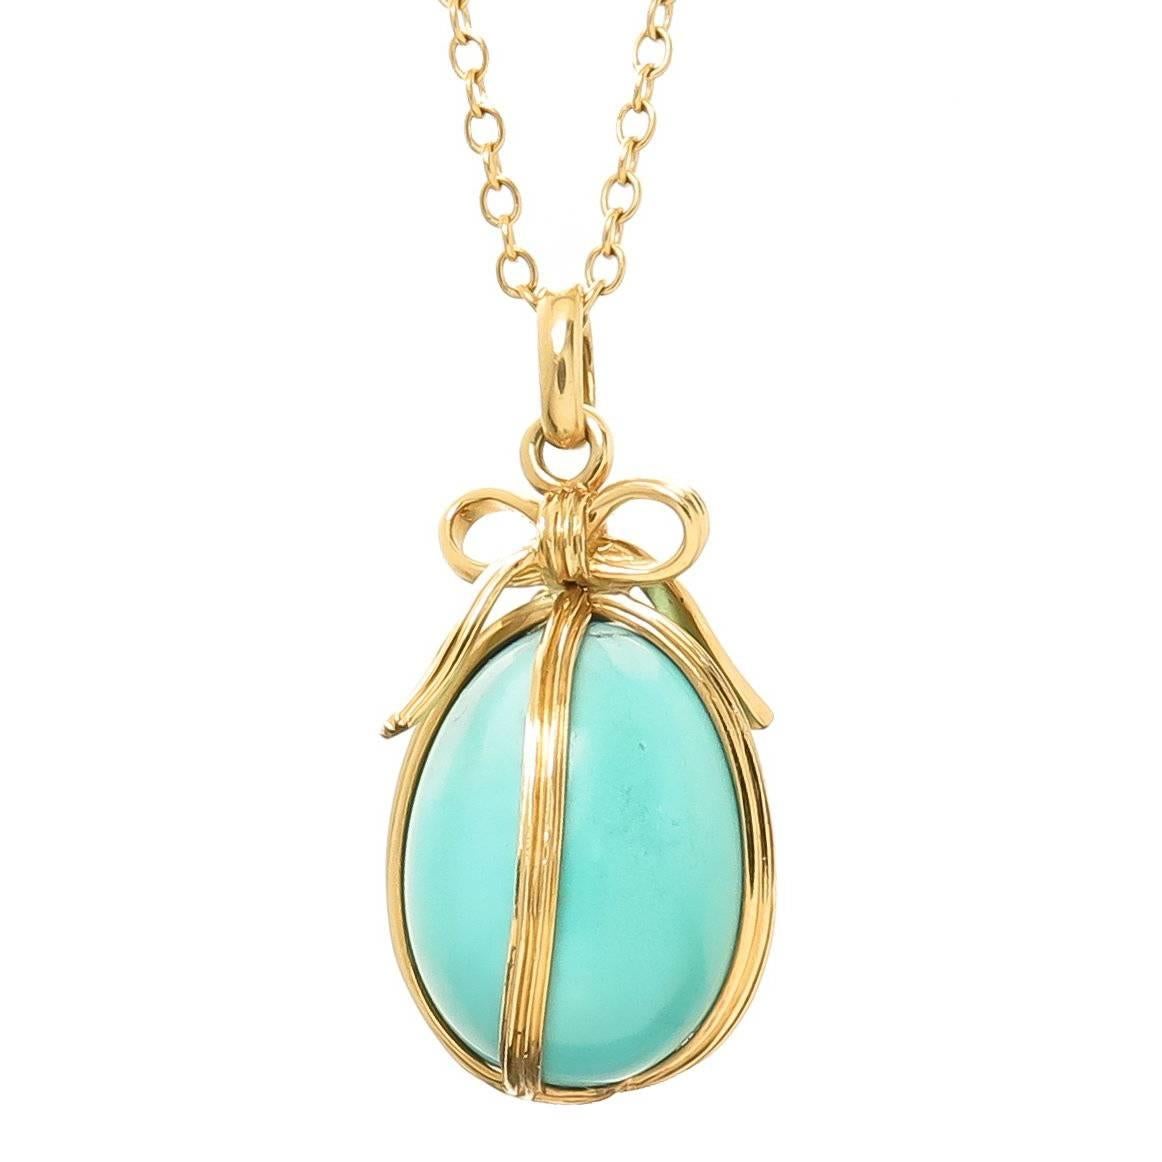 Jean Schlumberger for Tiffany & Co. Egg Pendant Necklace